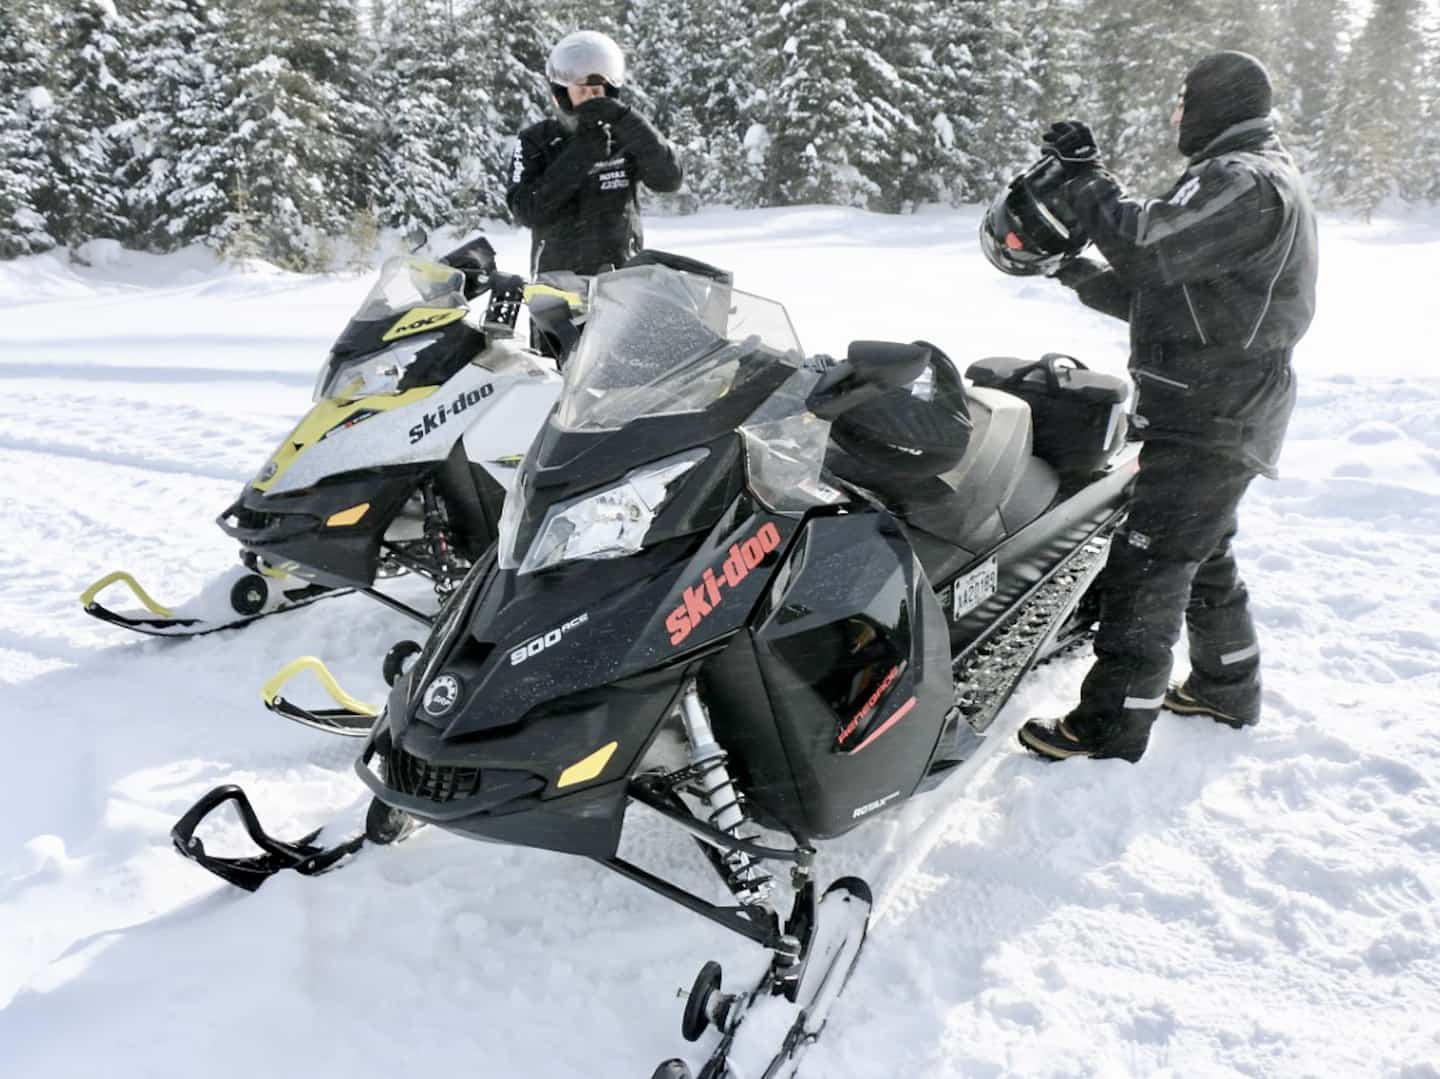 Winter is tough on snowmobilers